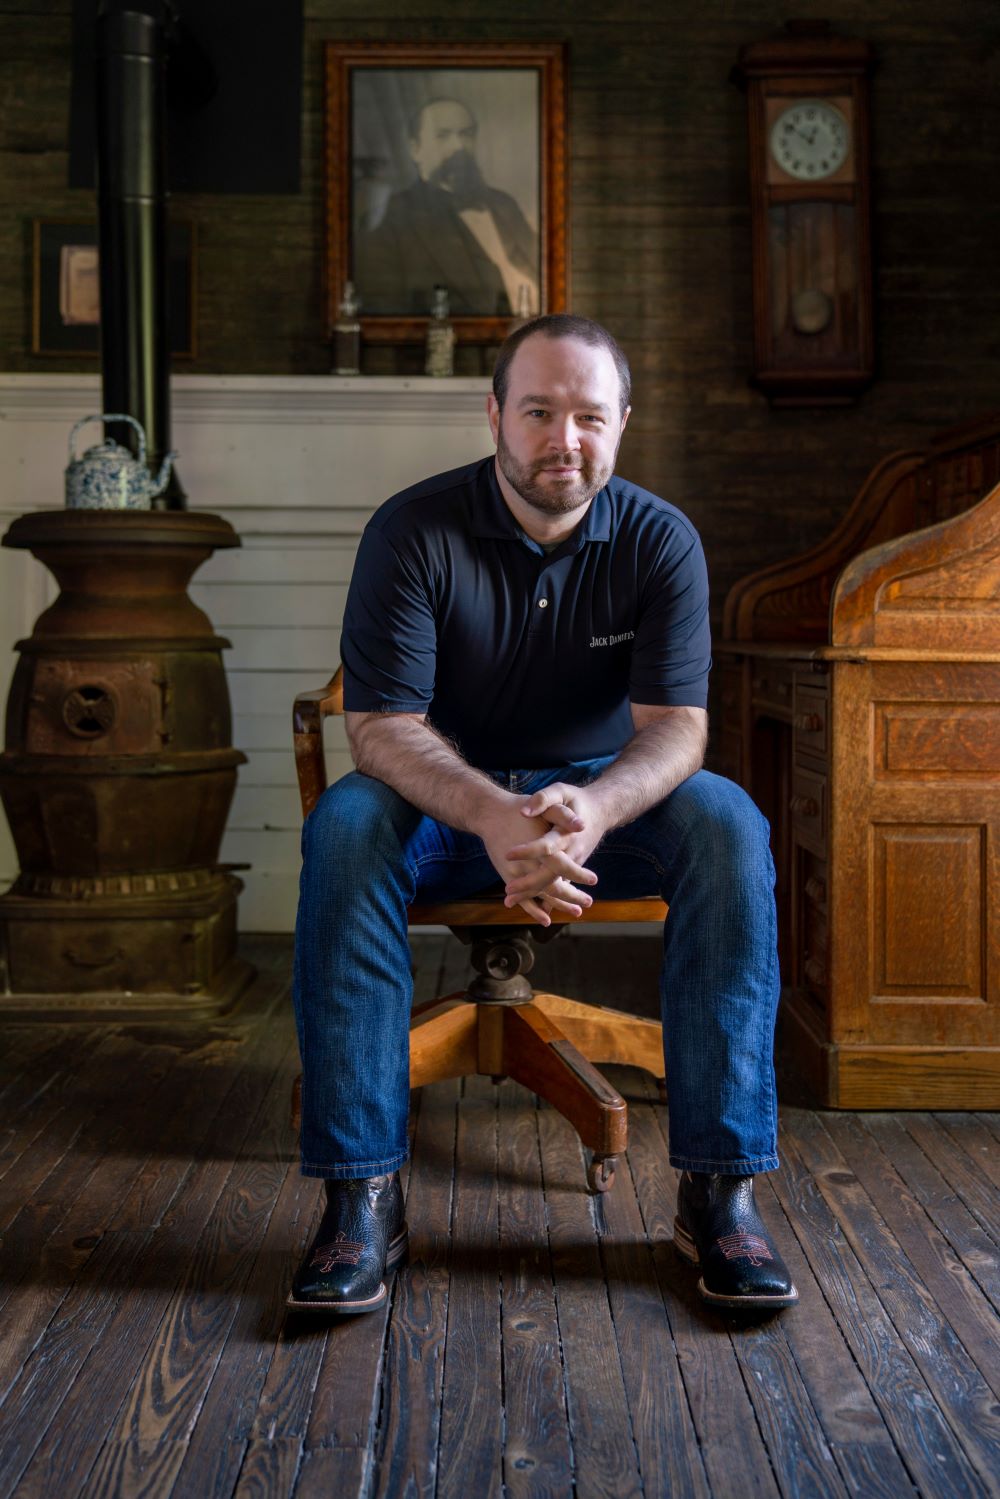 Chris Fletcher is seated at an antique desk in front of a portrait of Jack Daniels.